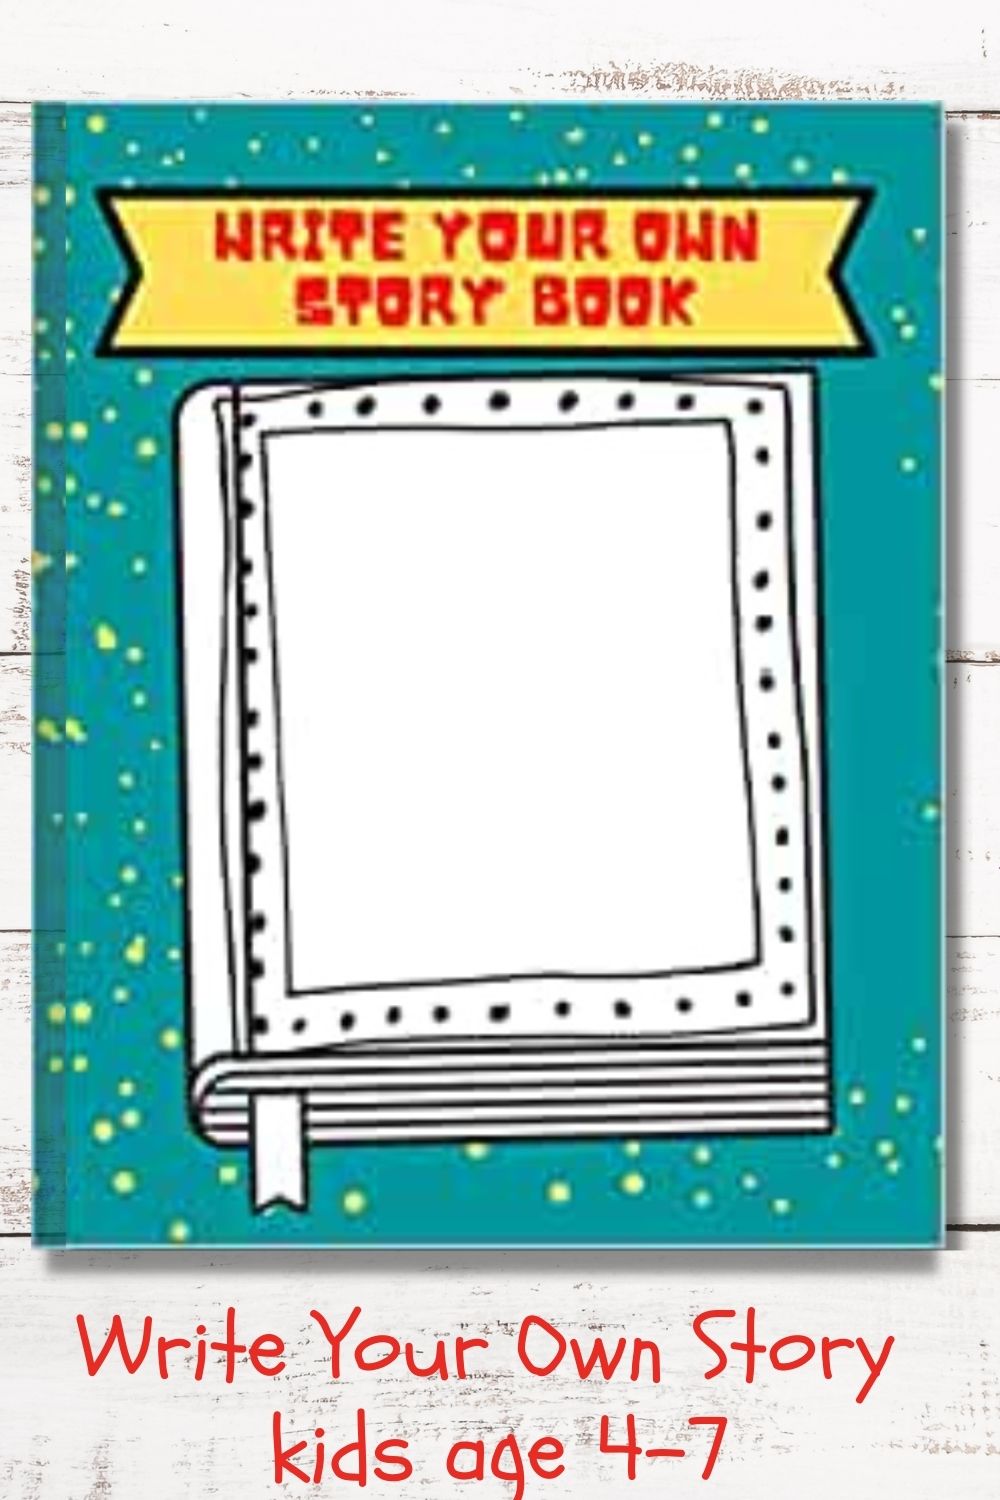 Draw & Write Your Own Story Book: Create your own story book for kids- a  creative draw and write journal book